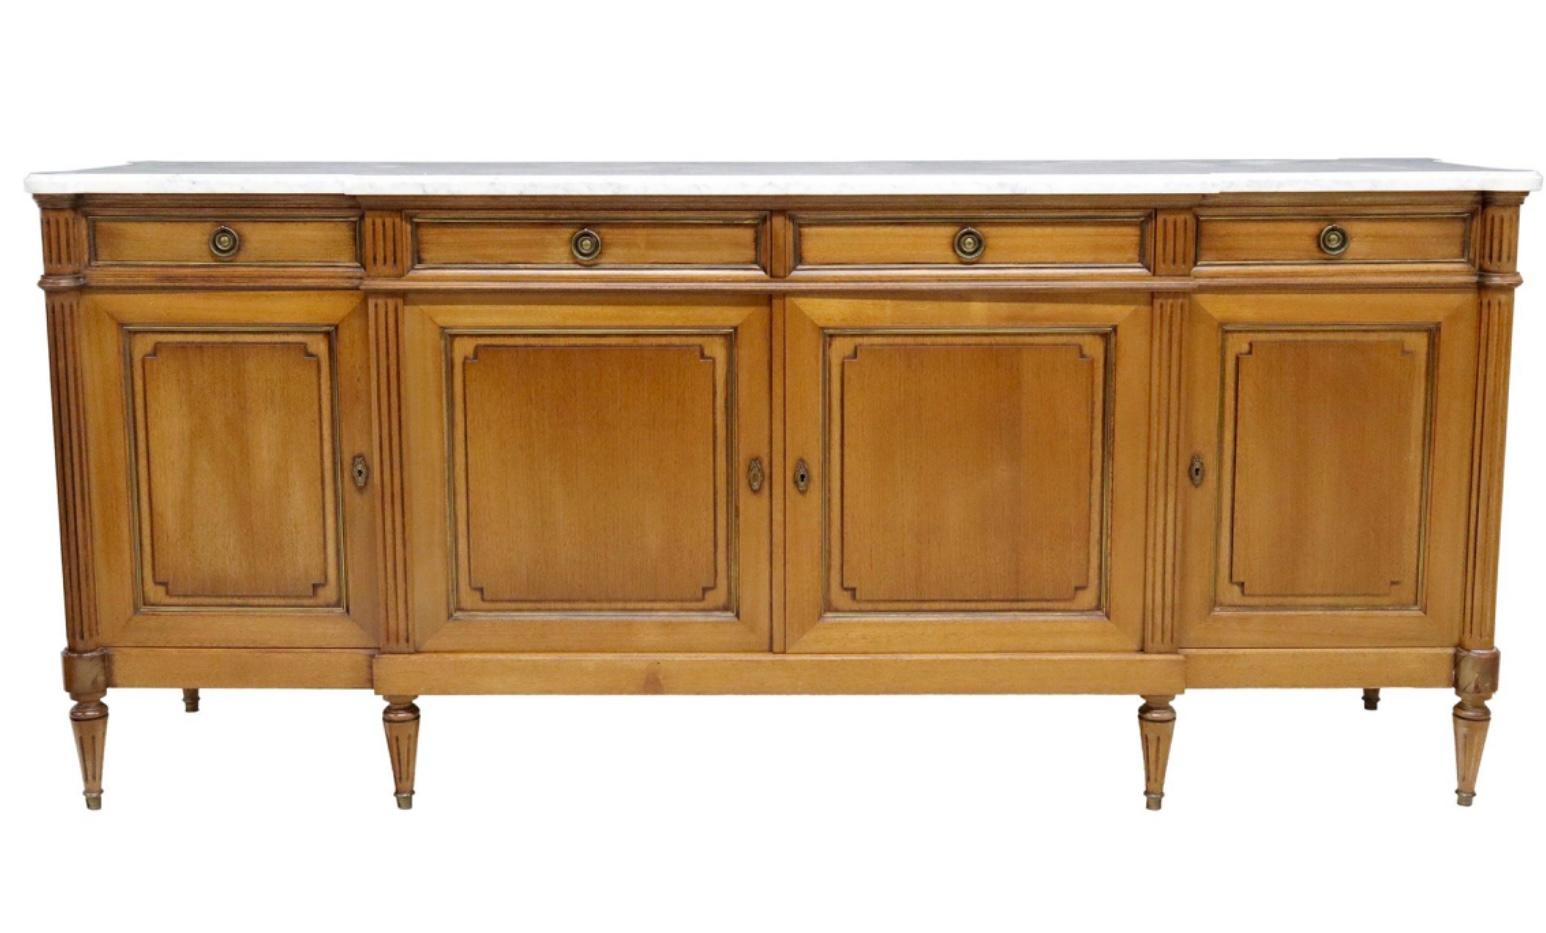 Very impressive French Louis XVI style mahogany enfilade, having white Carrara marble top over four drawers and cabinets leading to interior shelf storage, featuring bronze rosette hardware and trim, rising on tapered legs ending in brass sabots. A